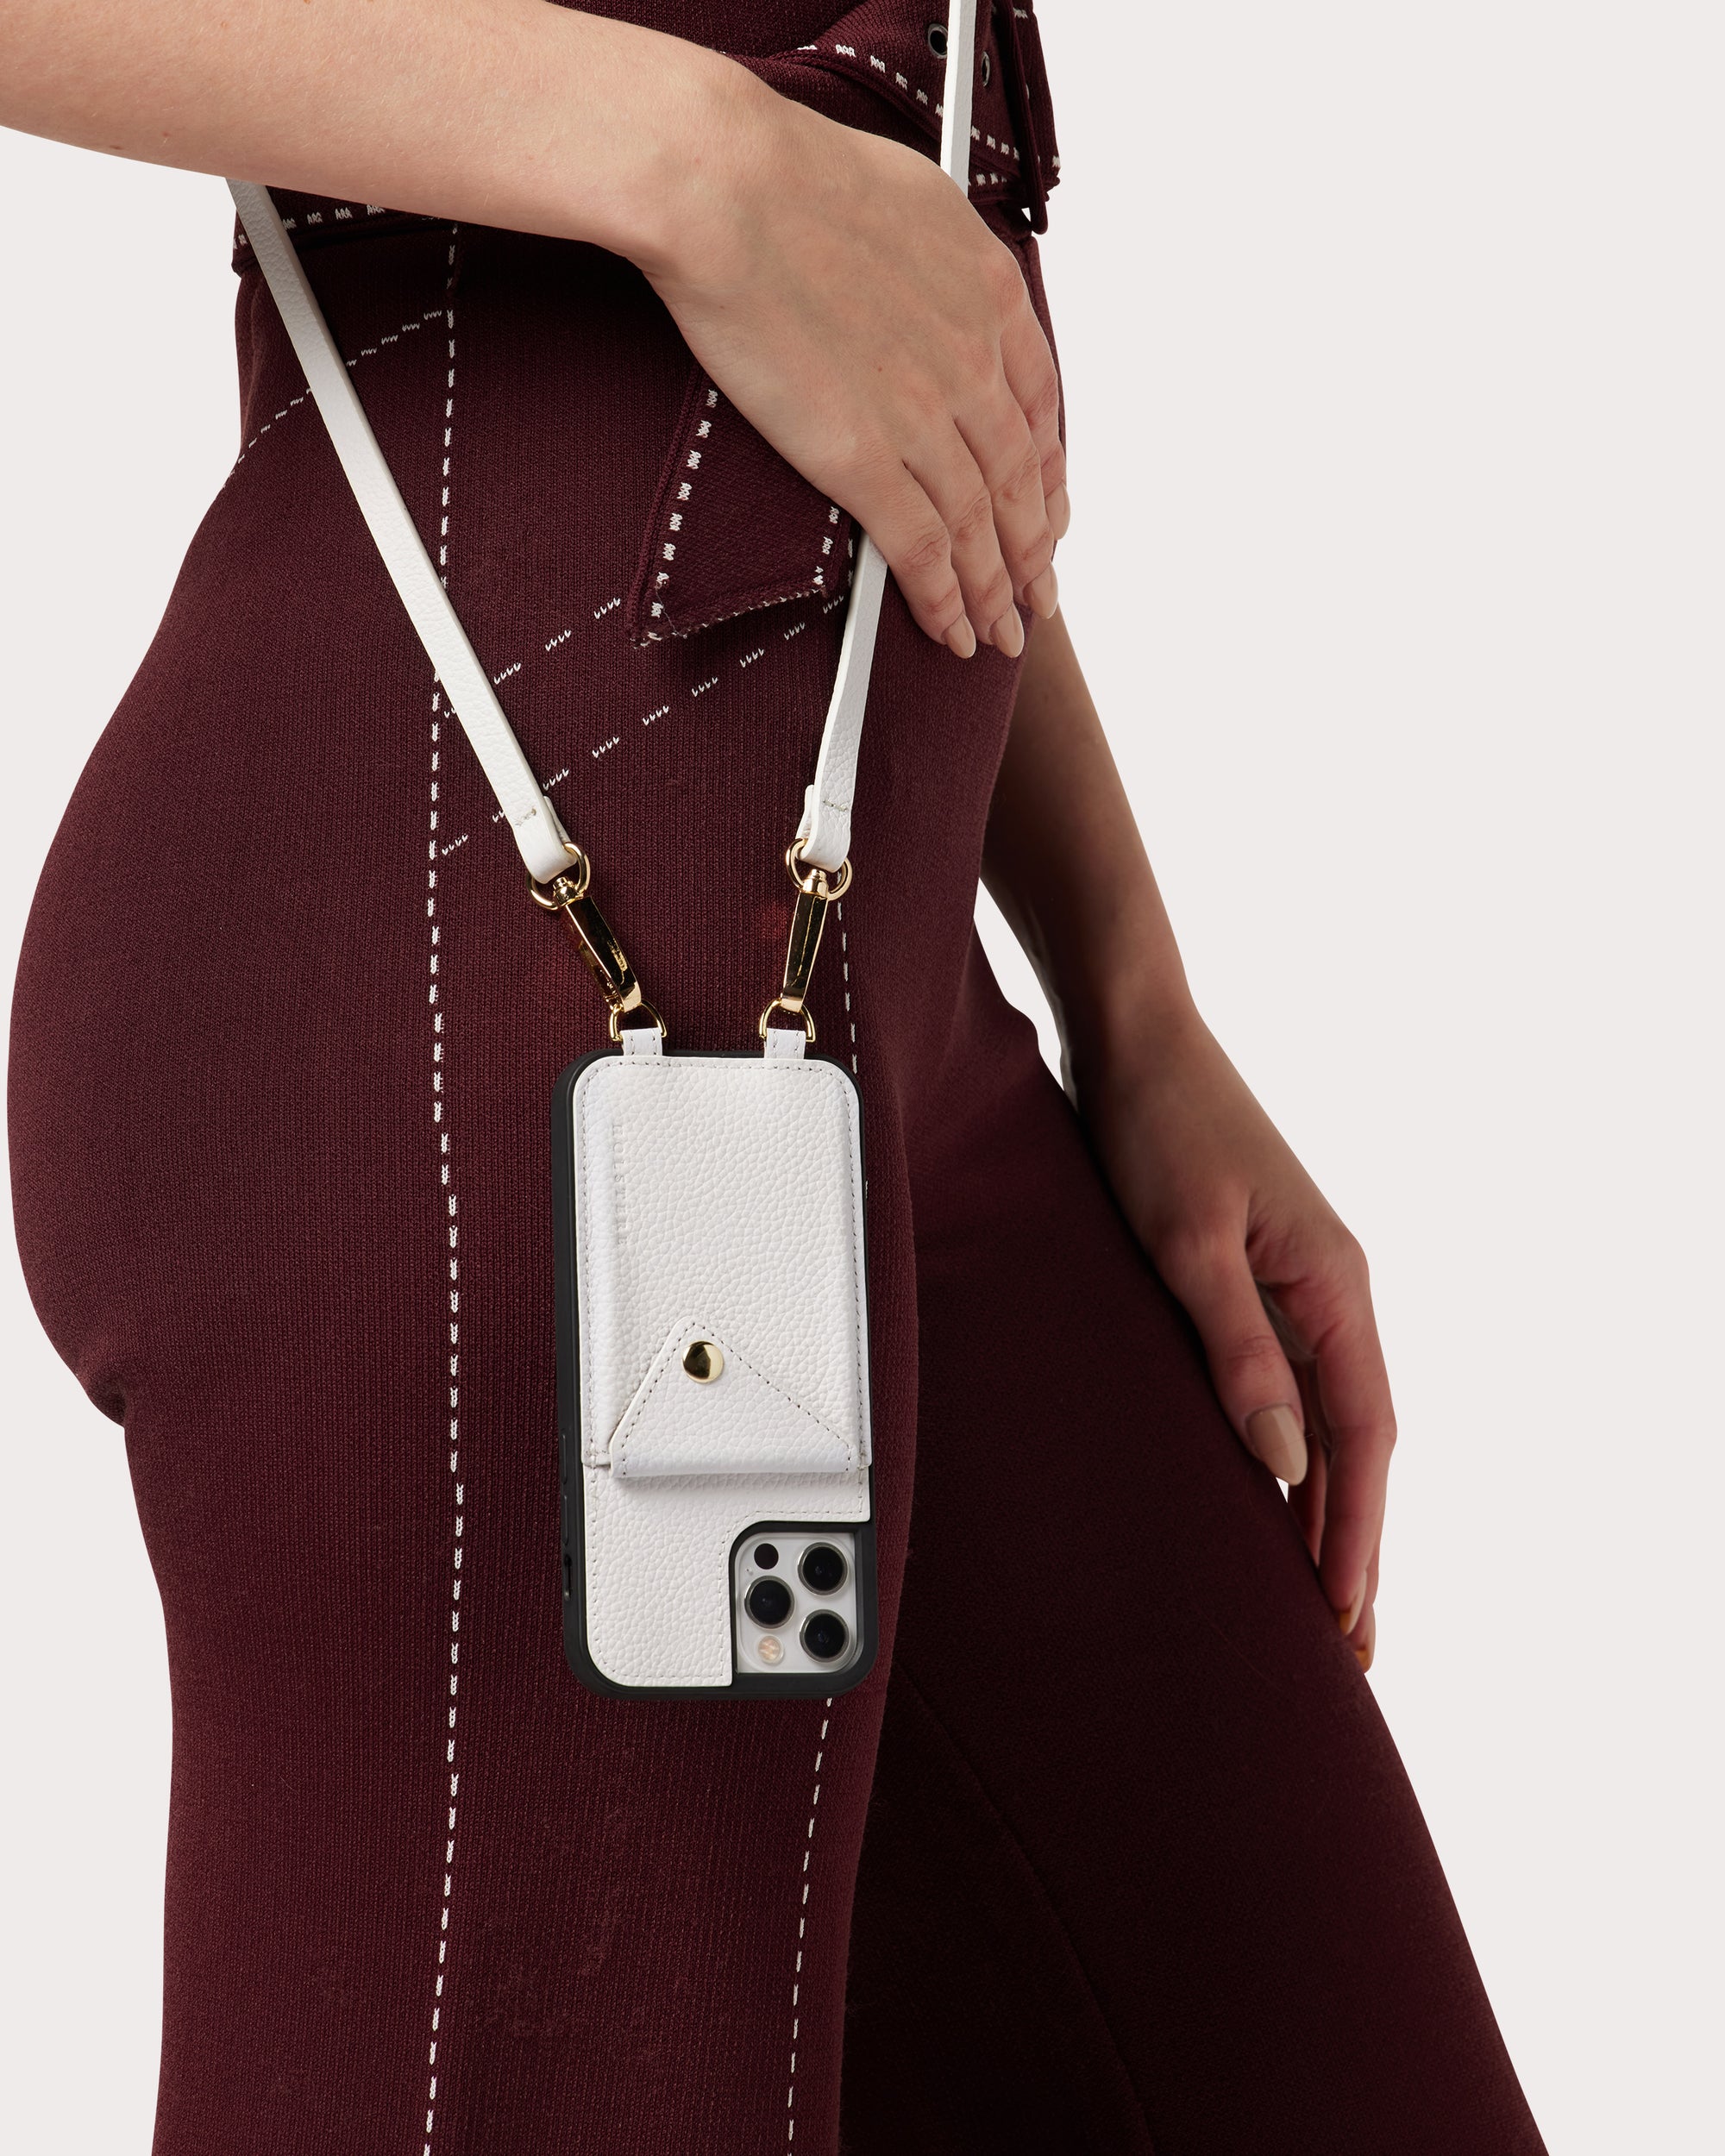 22 Of The Best Purses You Can Get On Amazon